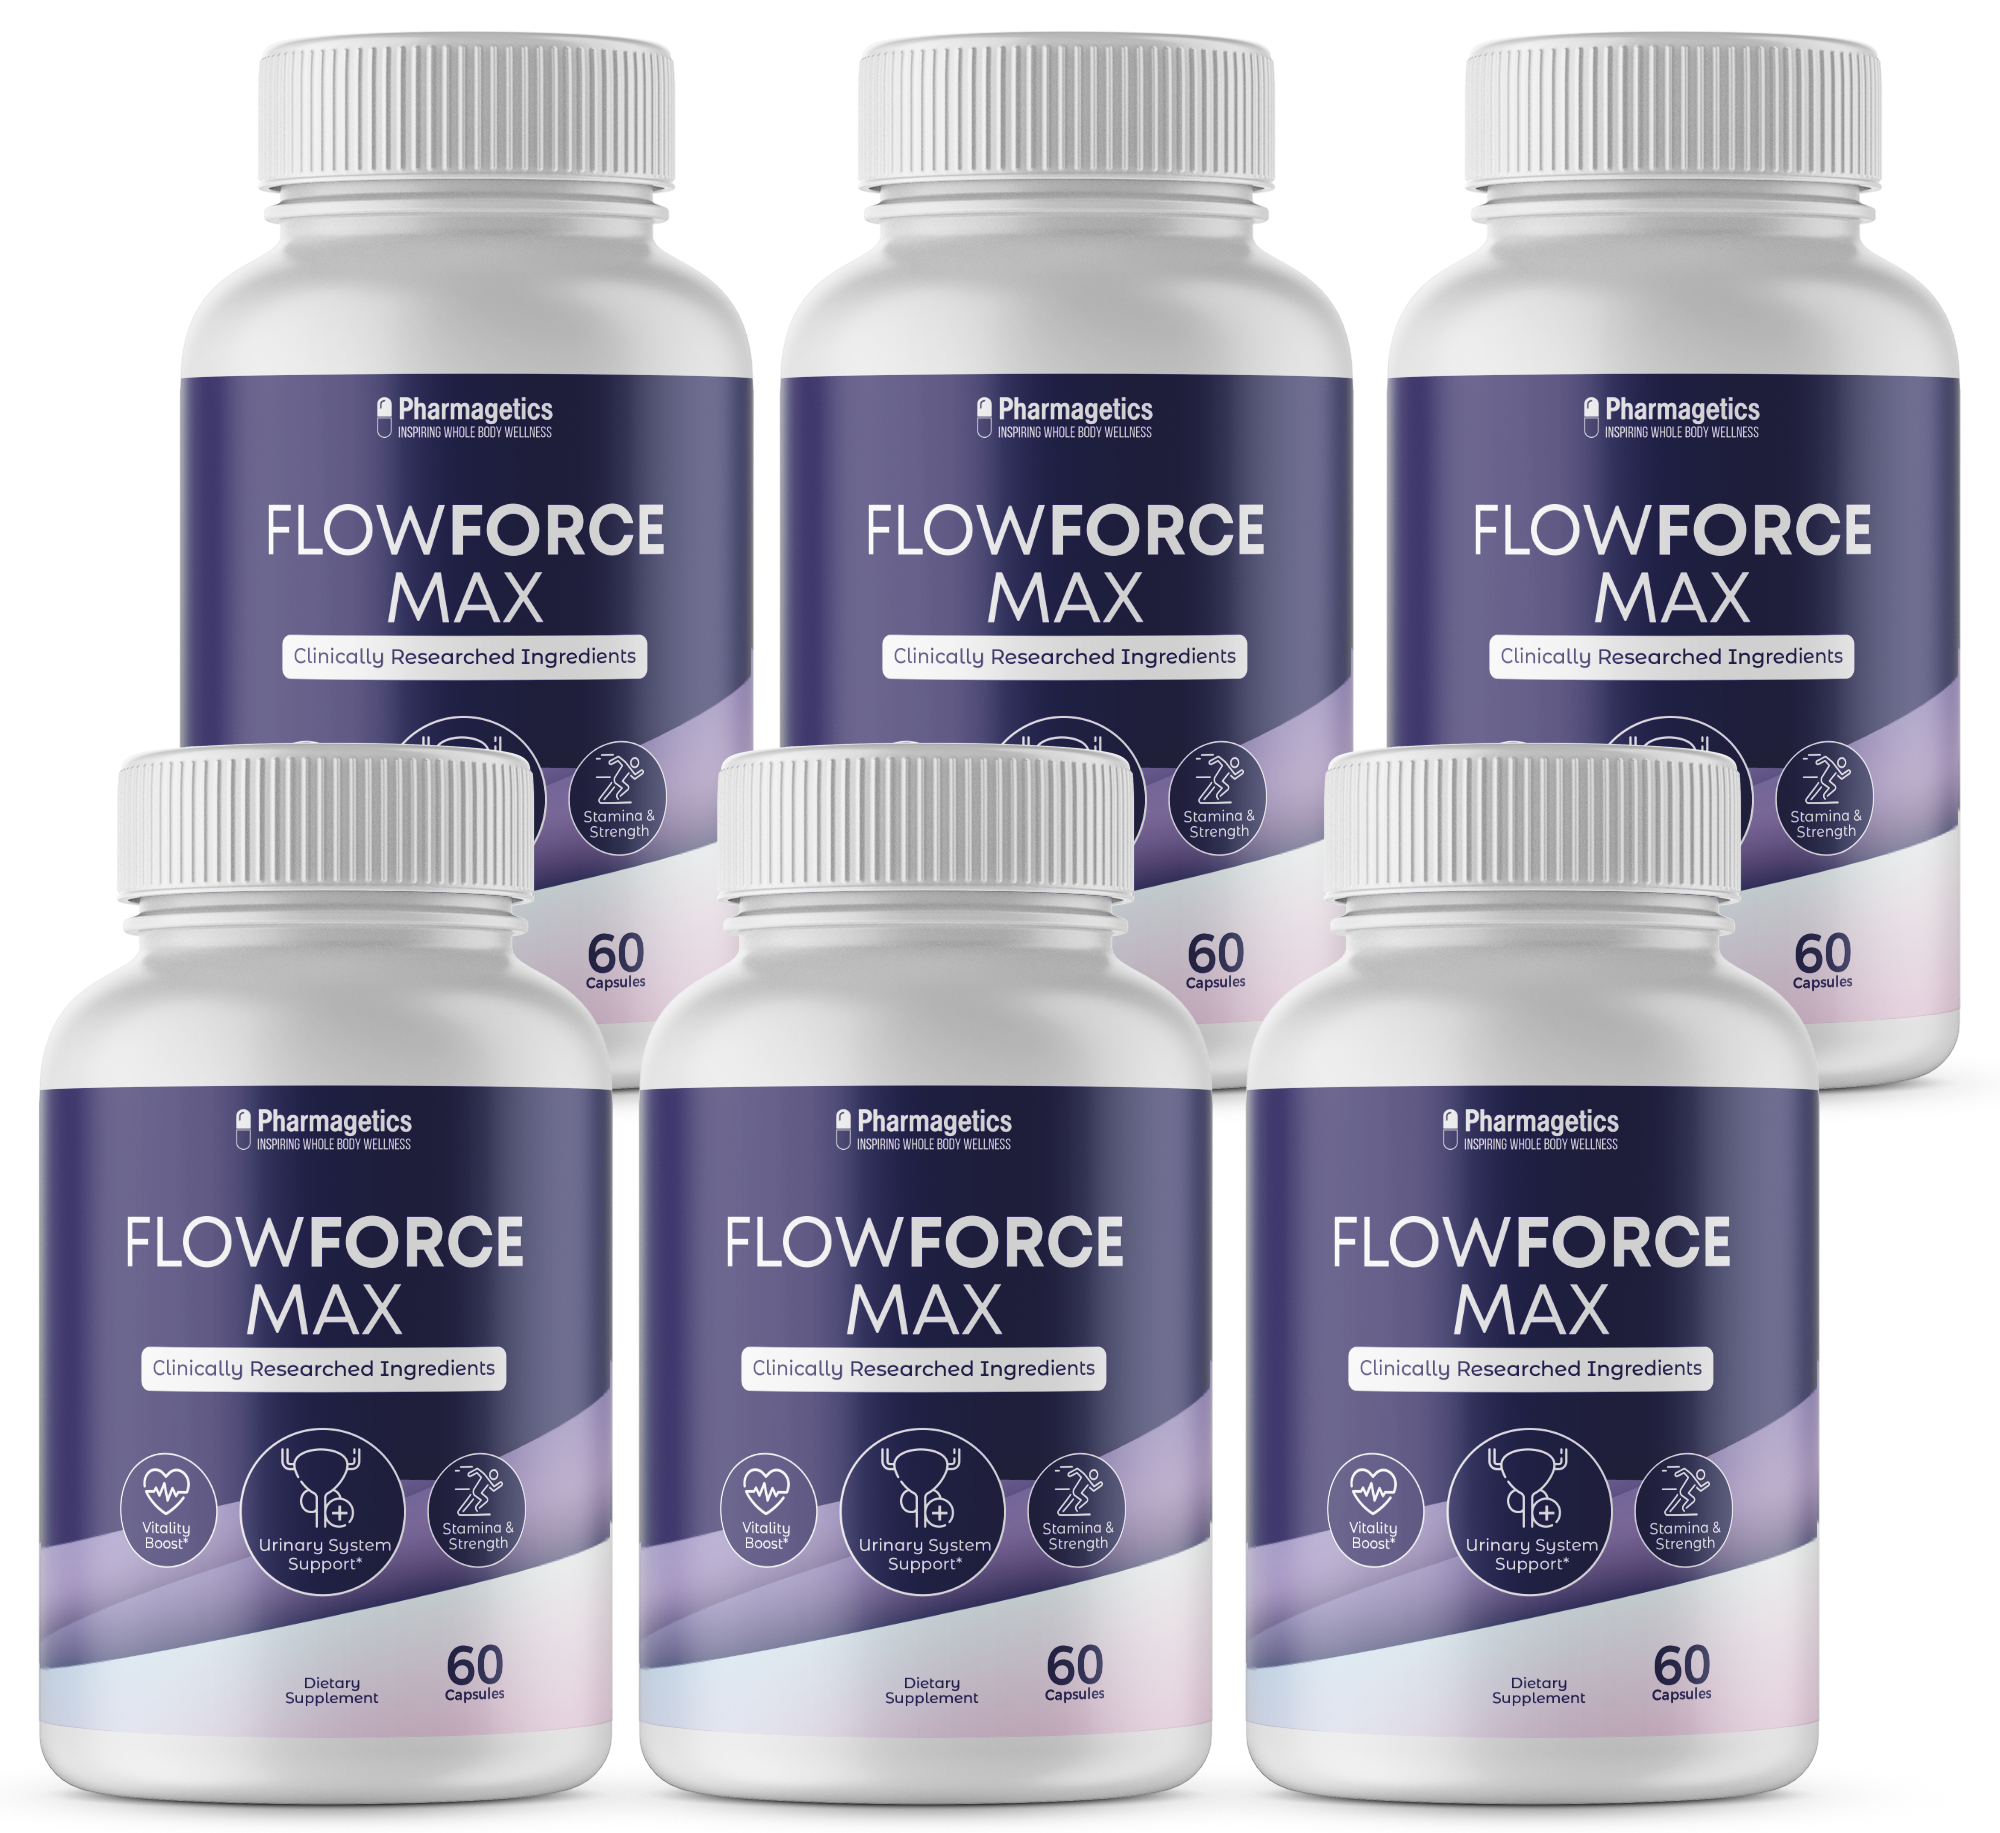 Flowforce Max Prostate Support Supplement Reduce Frequent Urination Flow Force Max - 6 Bottles